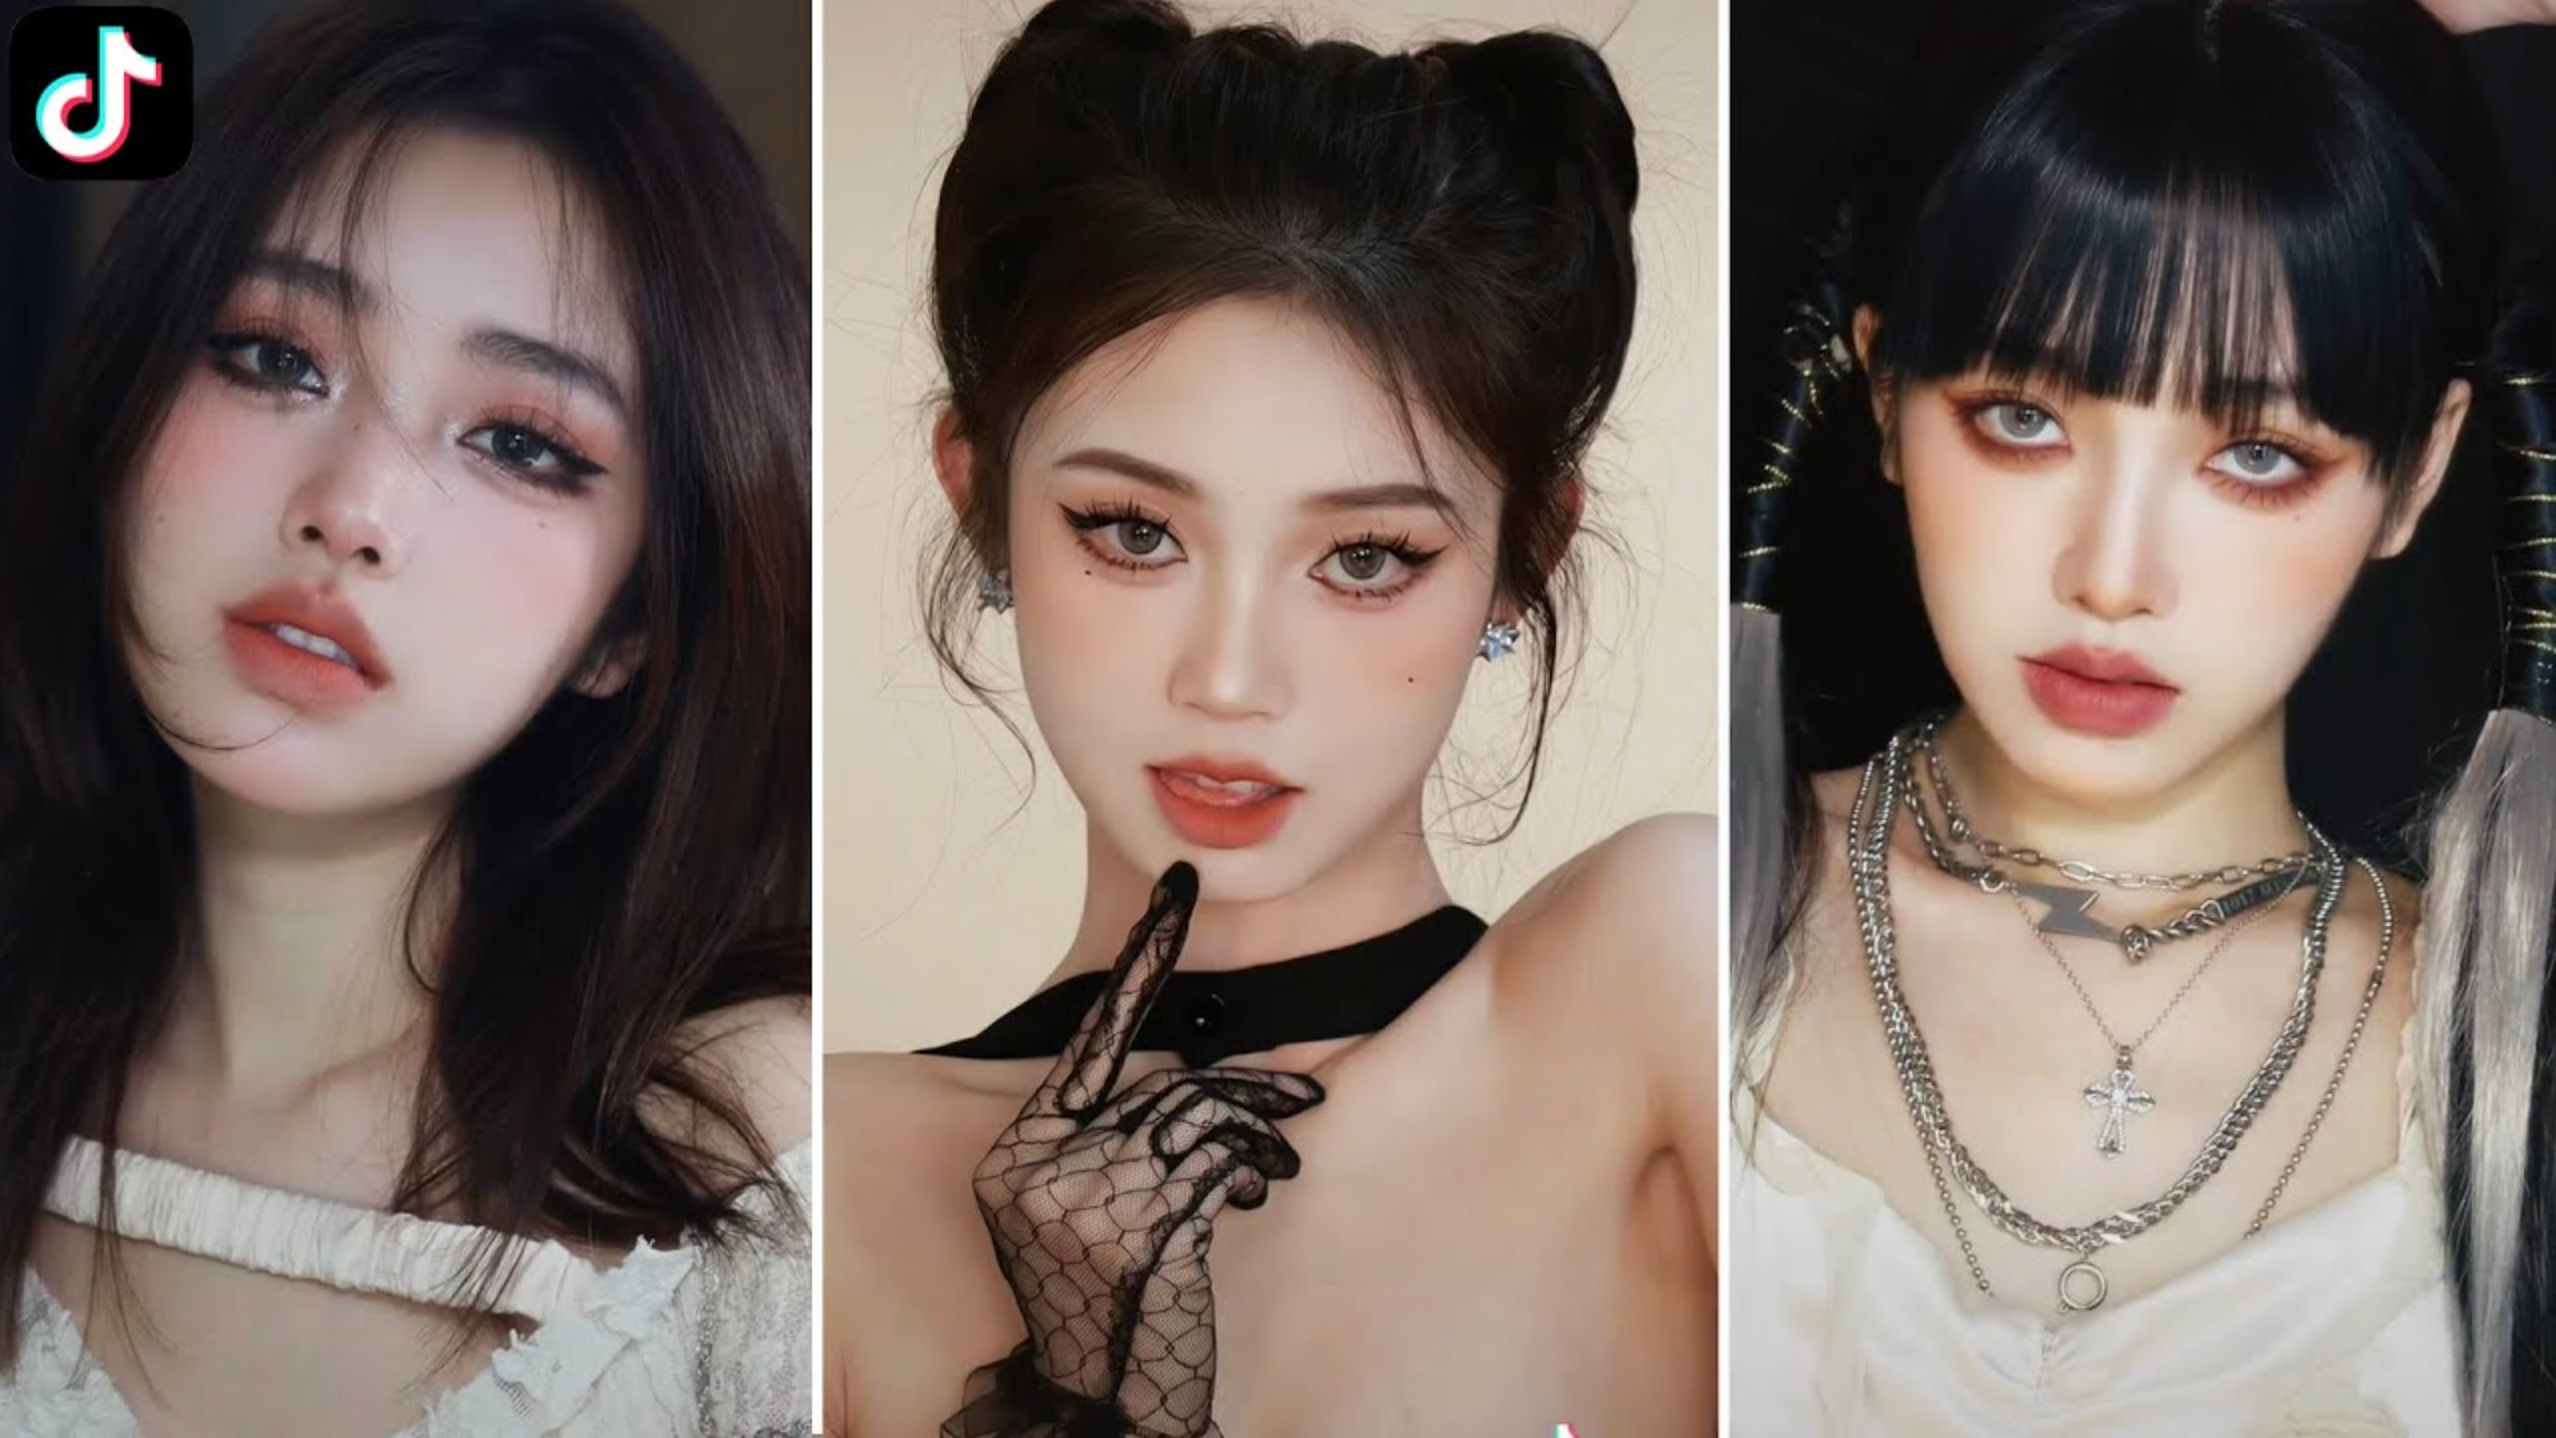 The viral rise of Chinese-style beauty and ‘Douyin makeup’ on TikTok